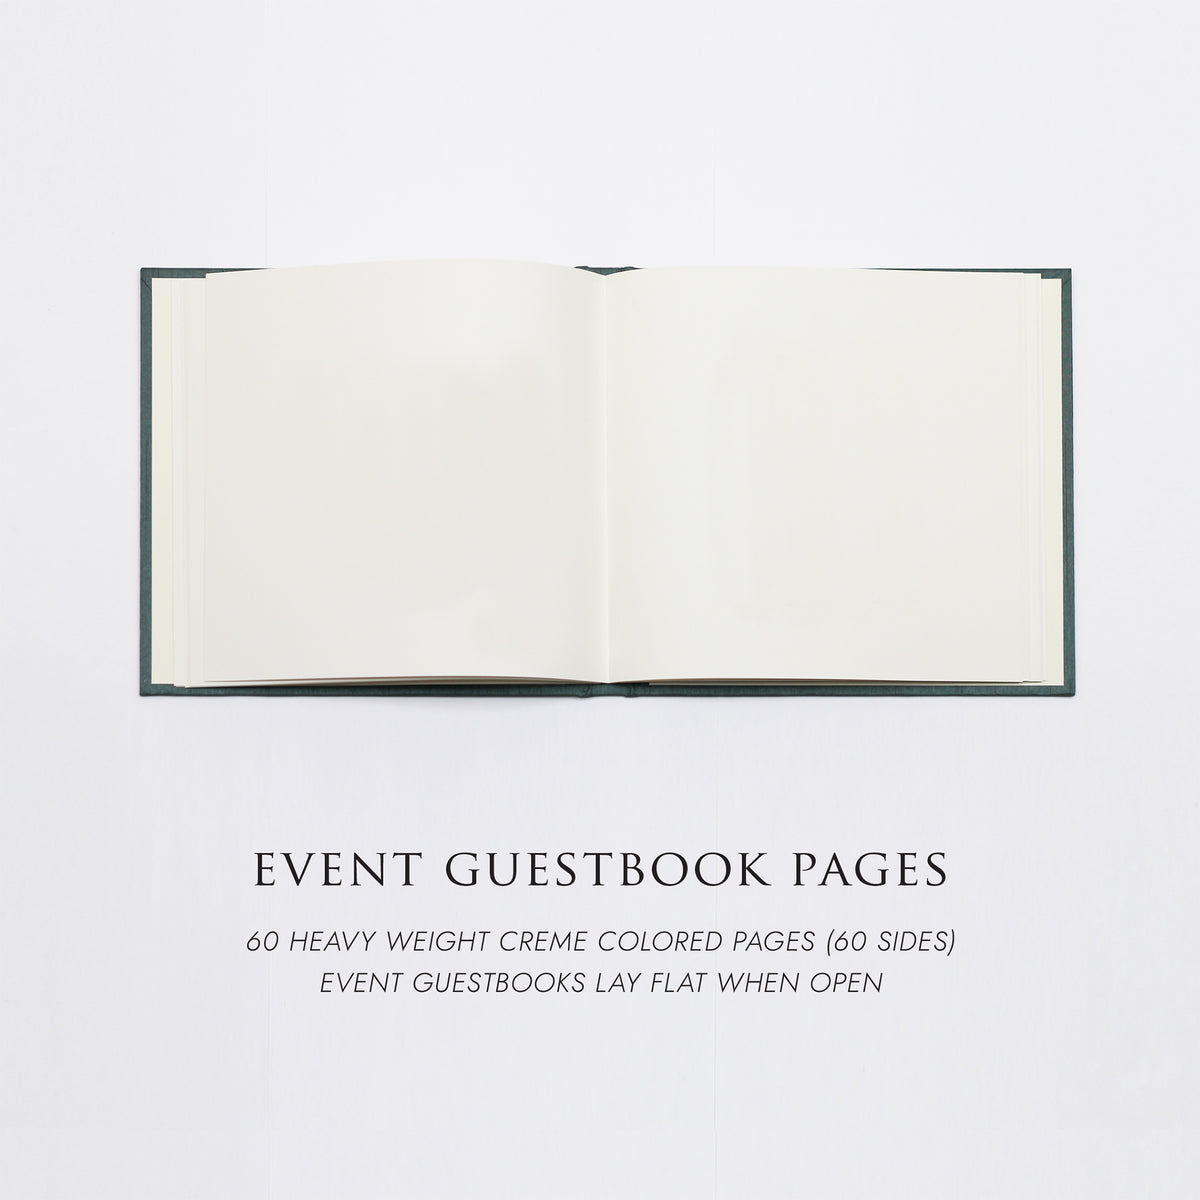 Event Guestbook Embossed with “Guests” | Cover: Dove Gray Linen | Available Personalized